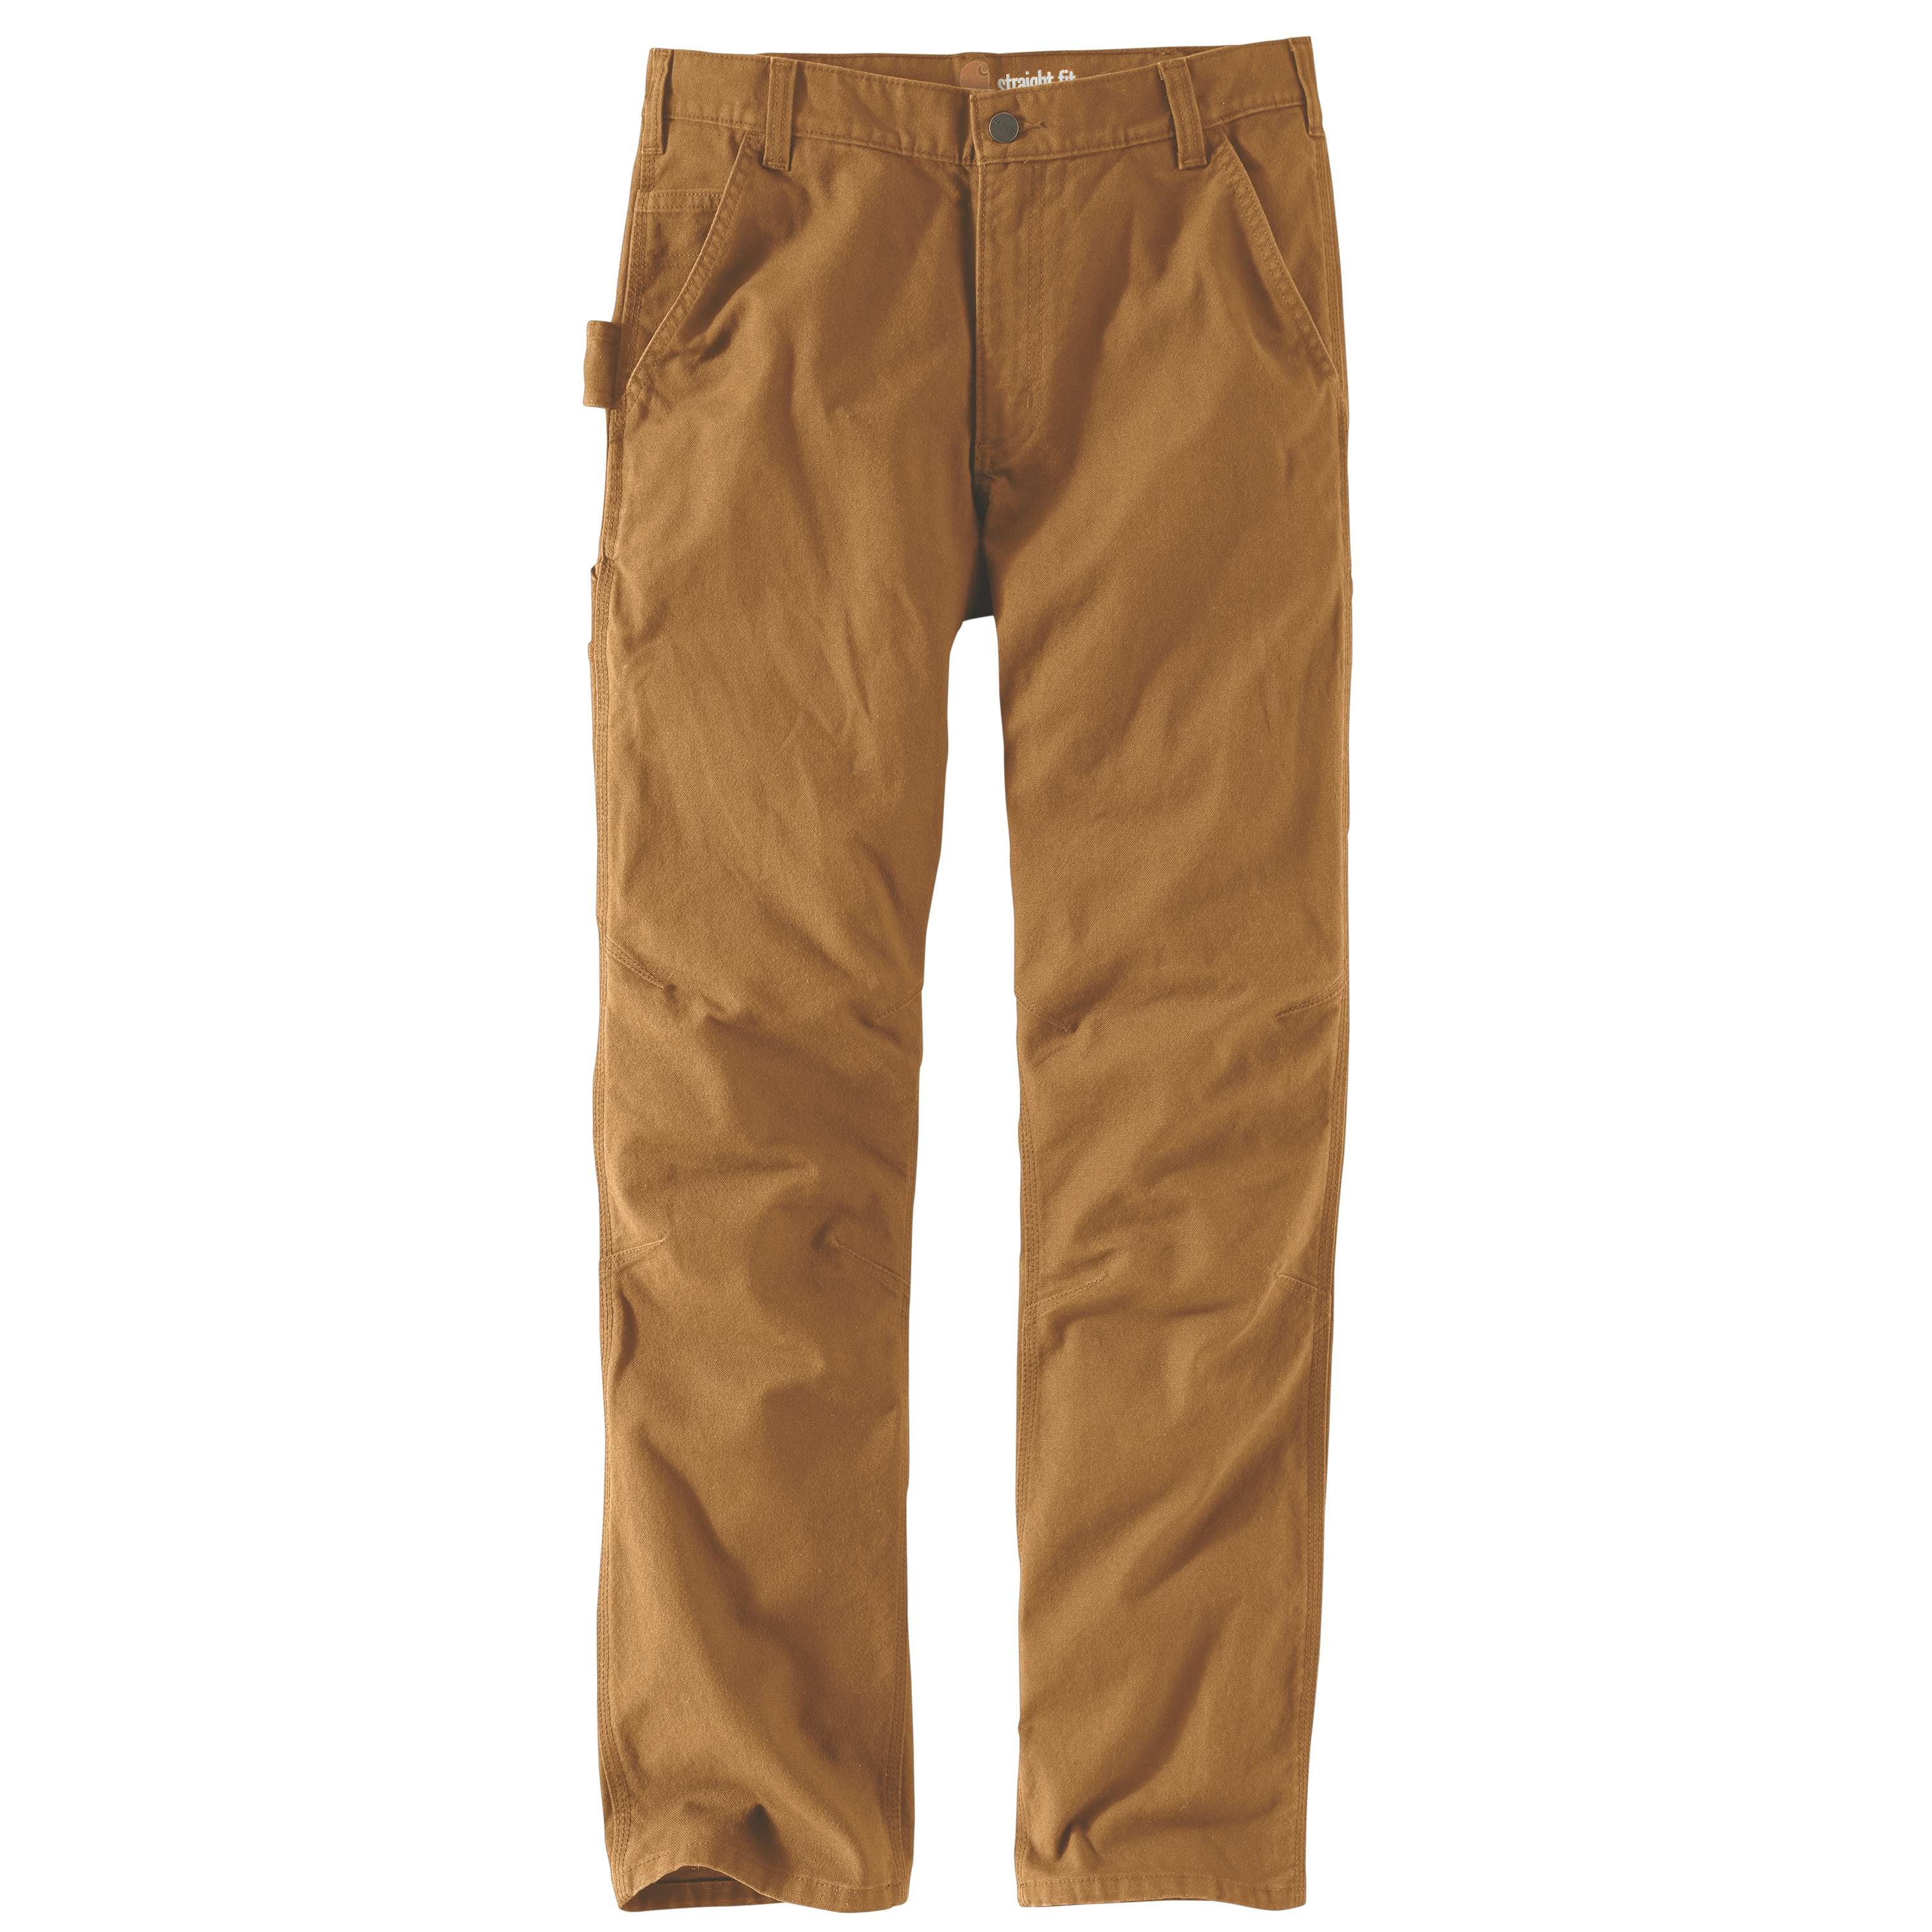 Pants that come with all the right moves - Carhartt.com Email Archive